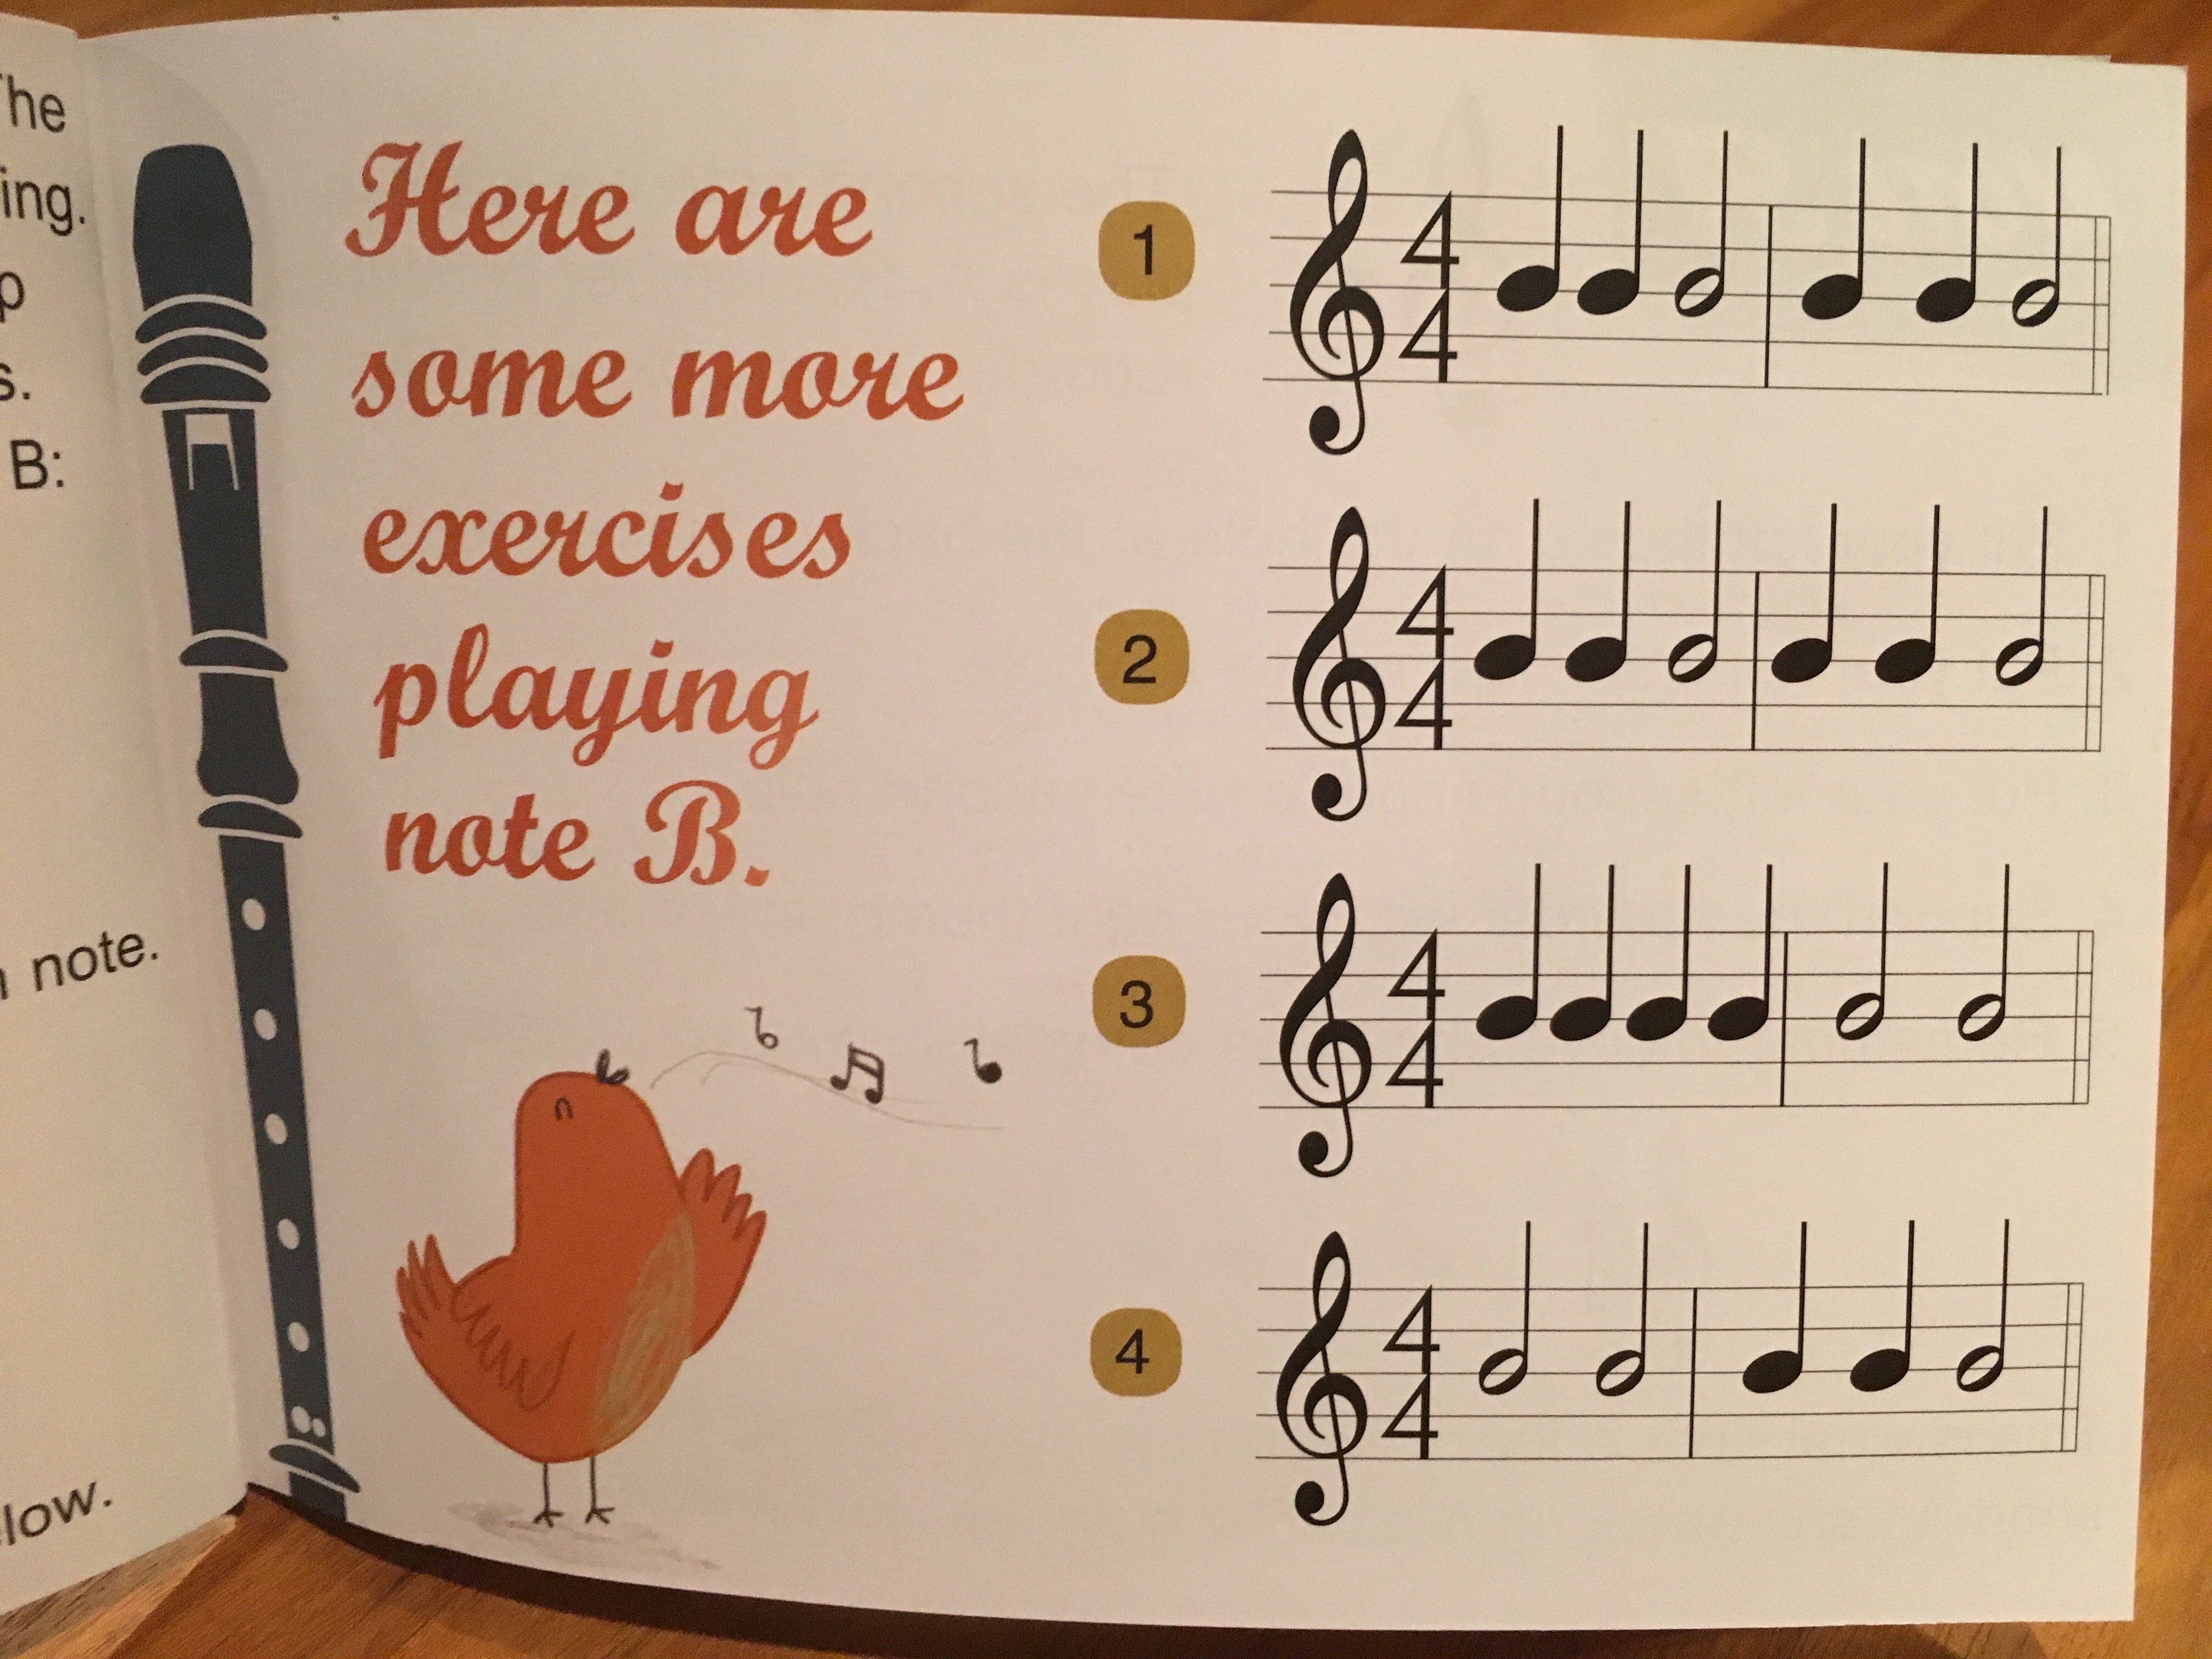 Here are some more exercises playing note B.